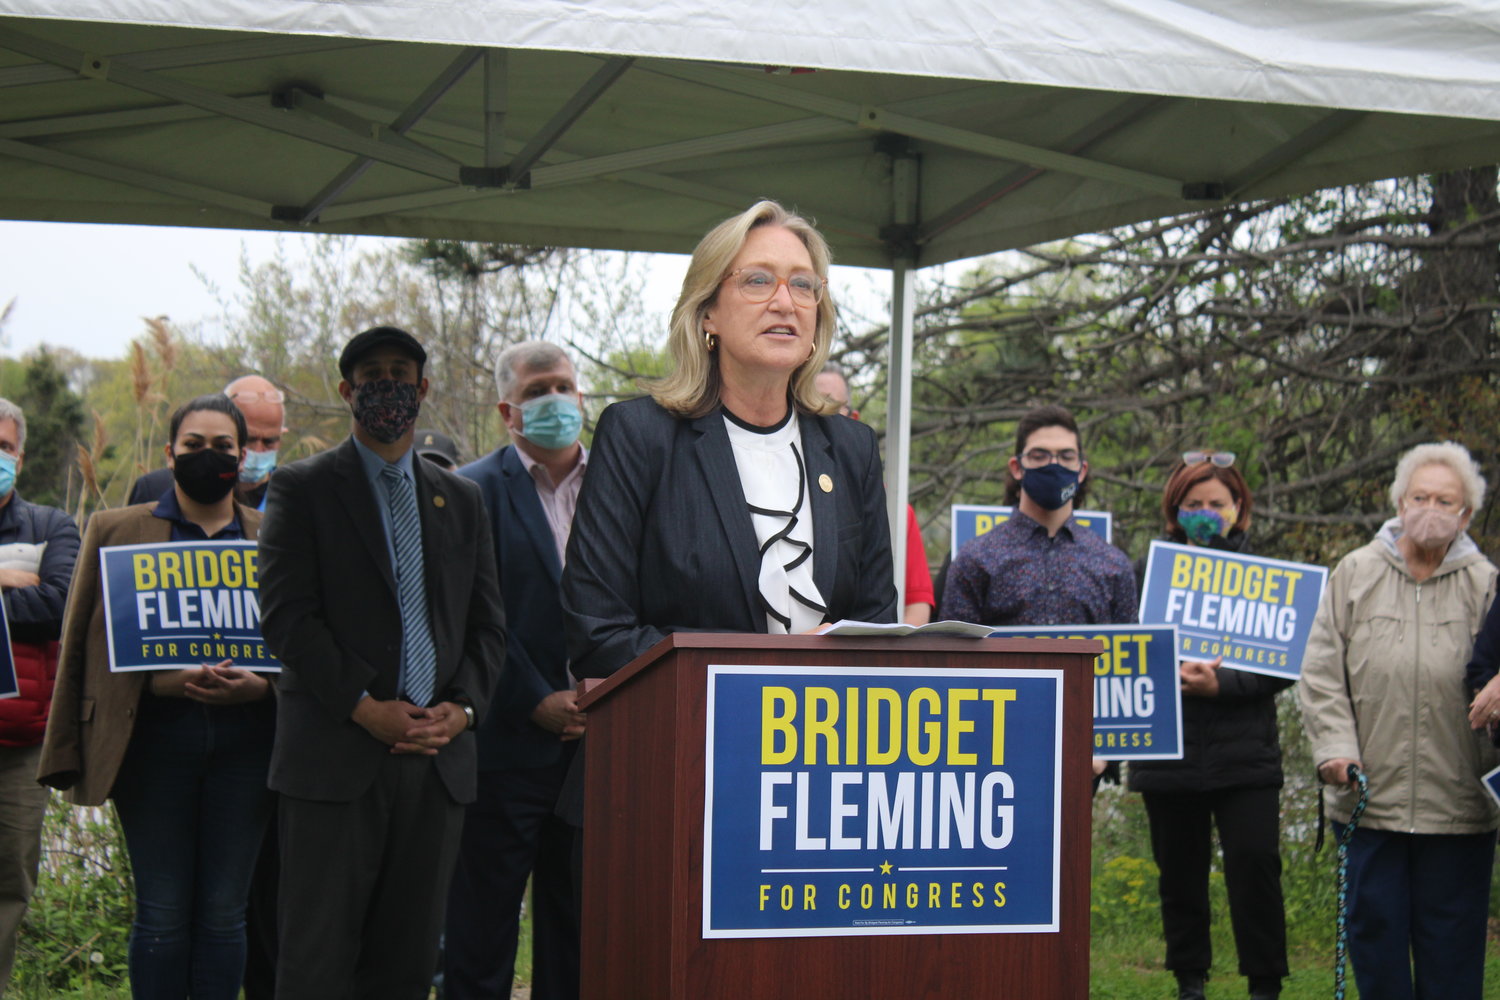 Suffolk County Legislator Bridget Fleming (D-Sag Harbor) announces her run for Congress in New York’s First Congressional District on Monday, May 3 in Patchogue alongside Democratic Party leaders.